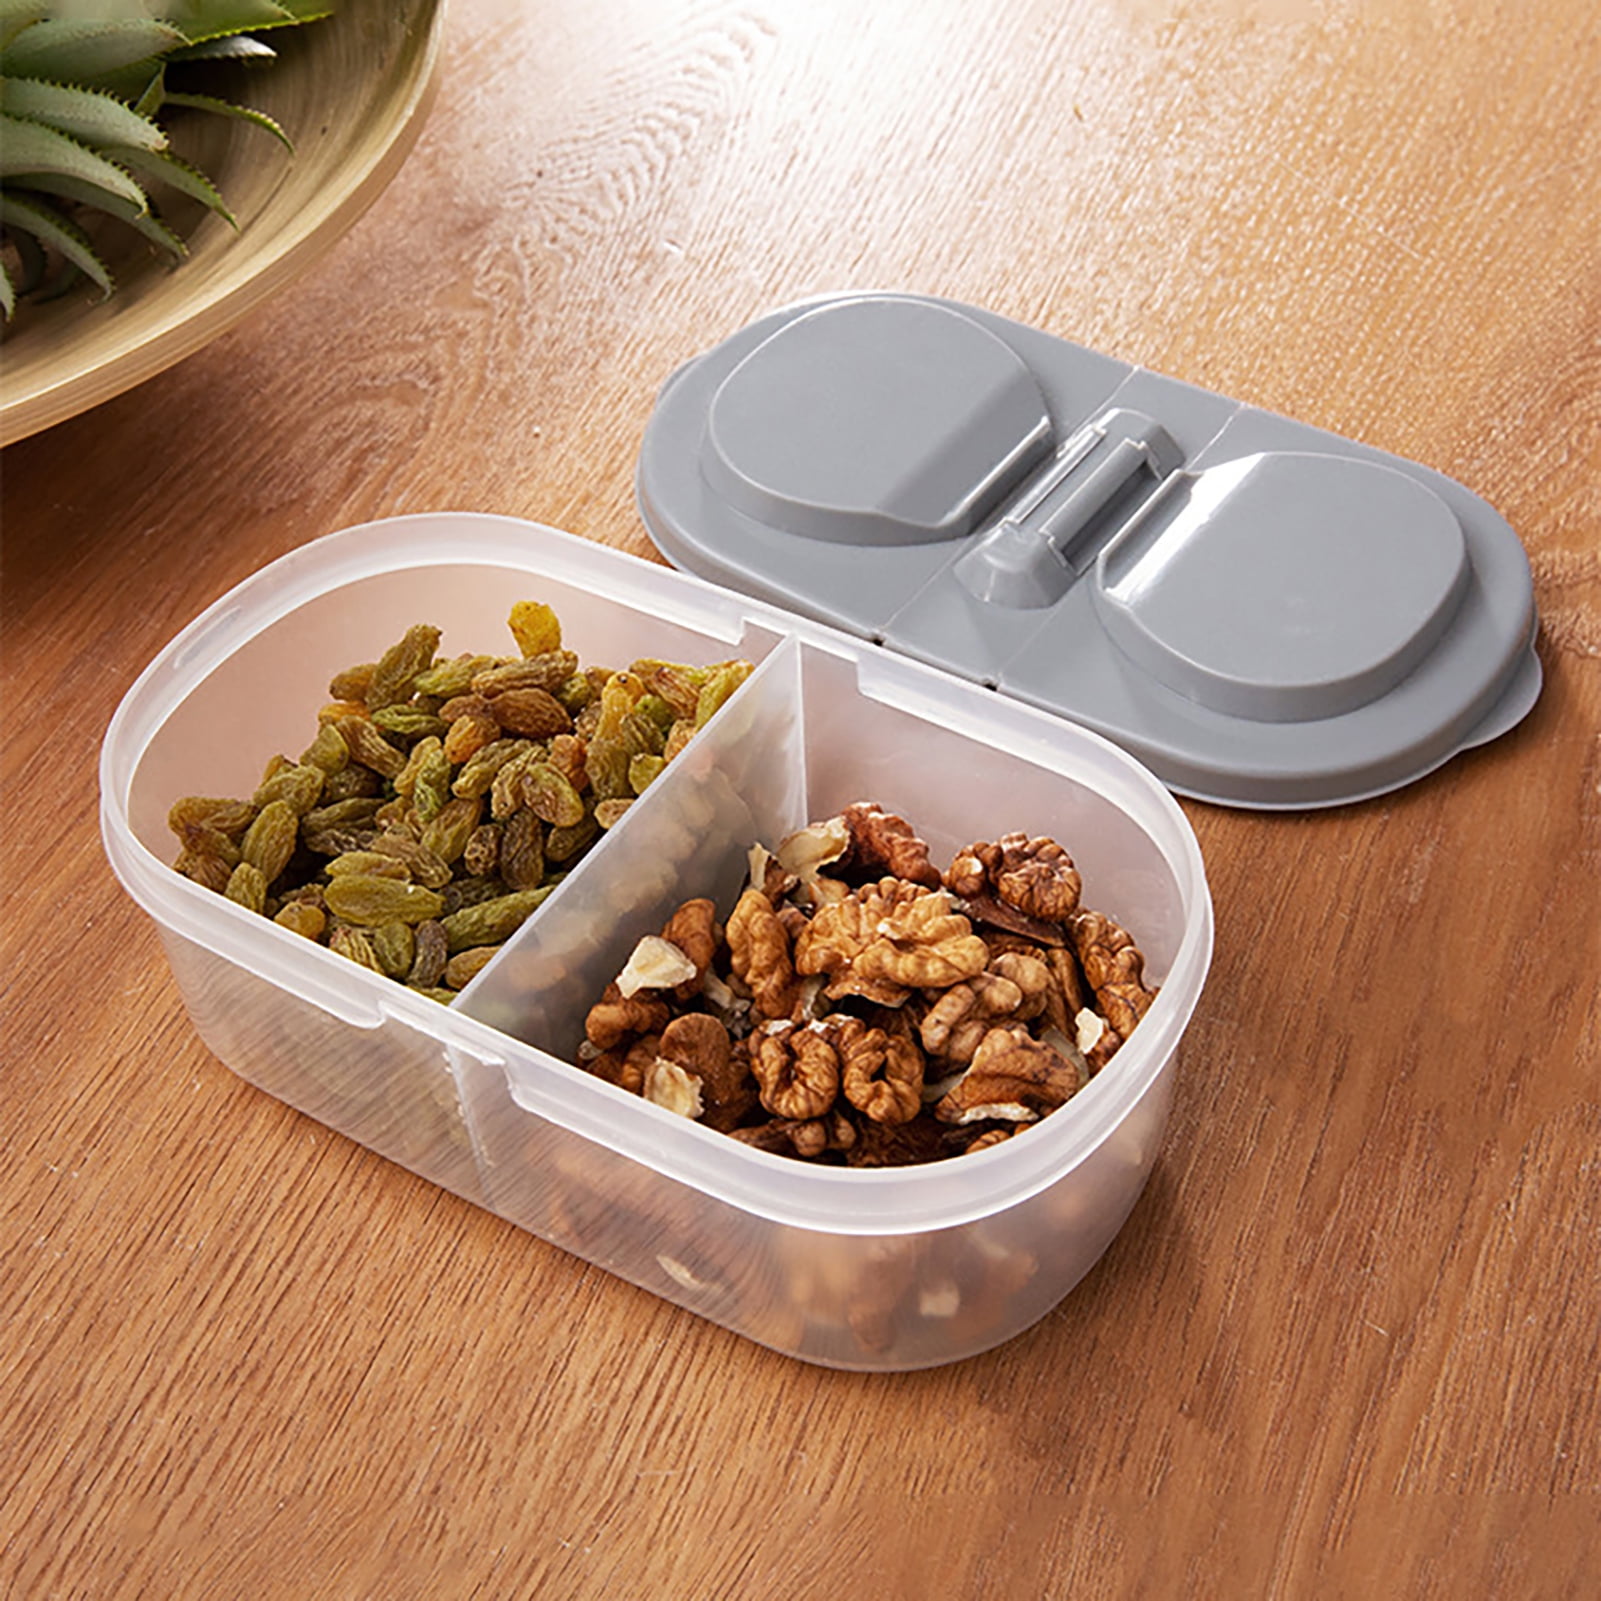 Portable Salad Lunch Container - 38 Oz Salad Bowl - 2 Compartments With  Dressing Cup, Large Bento Boxes, Meal Prep To Go Containers For Food Fruit  Sna